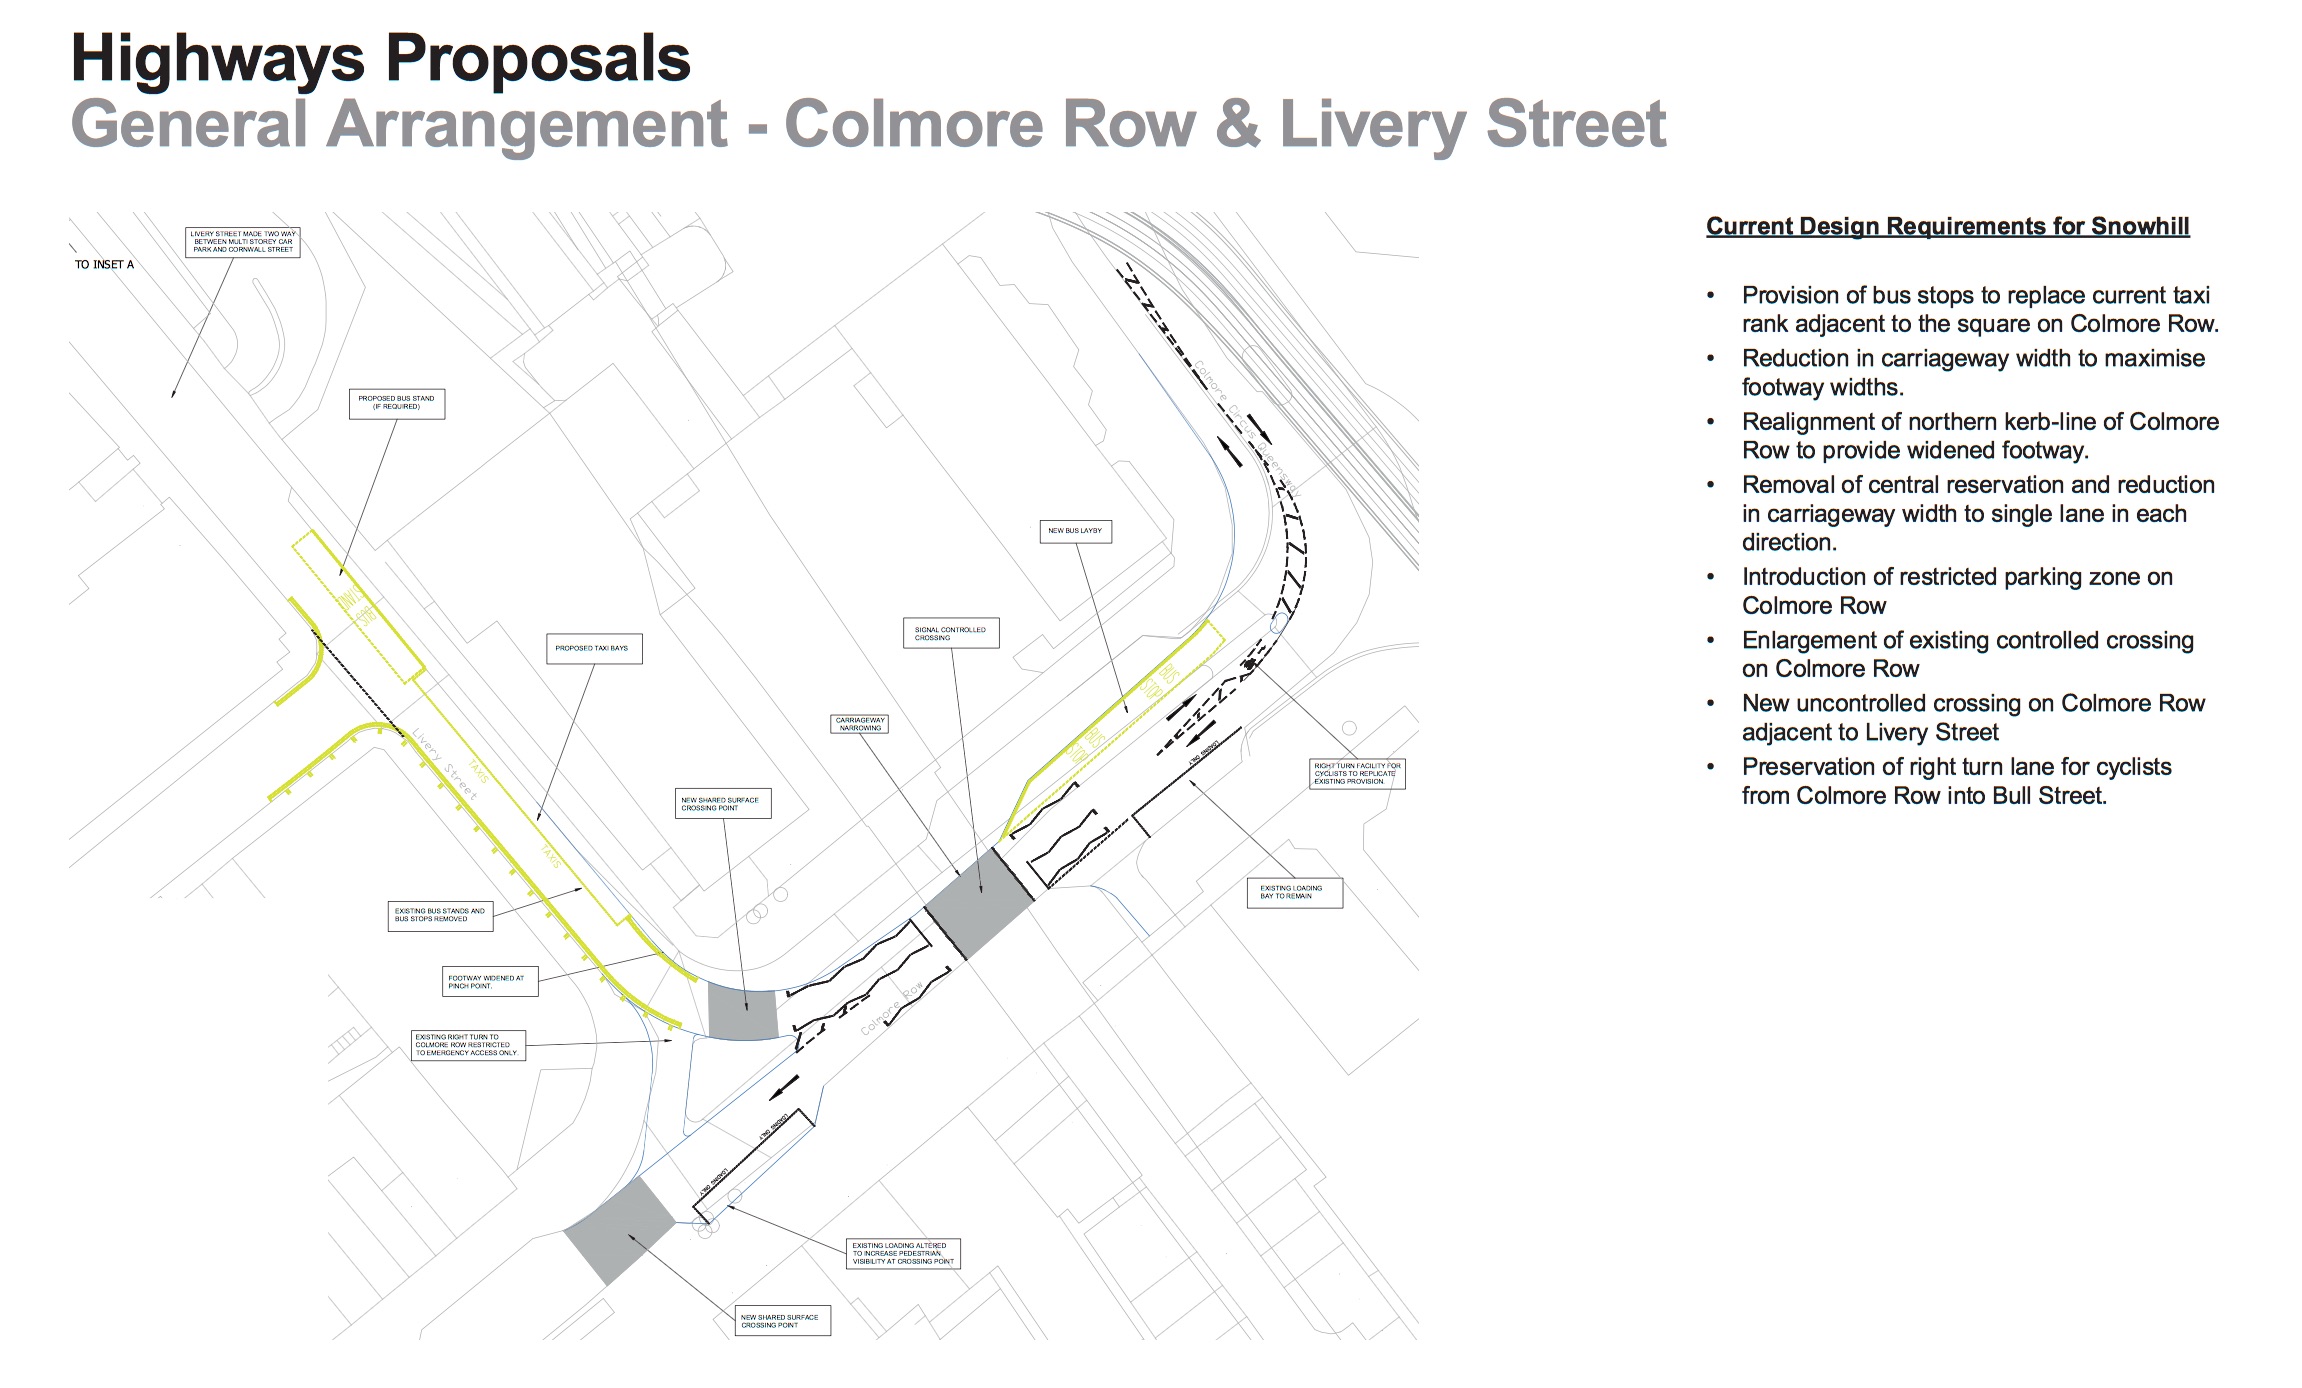 Diagram of changes to Colmore Row, from the published proposal.